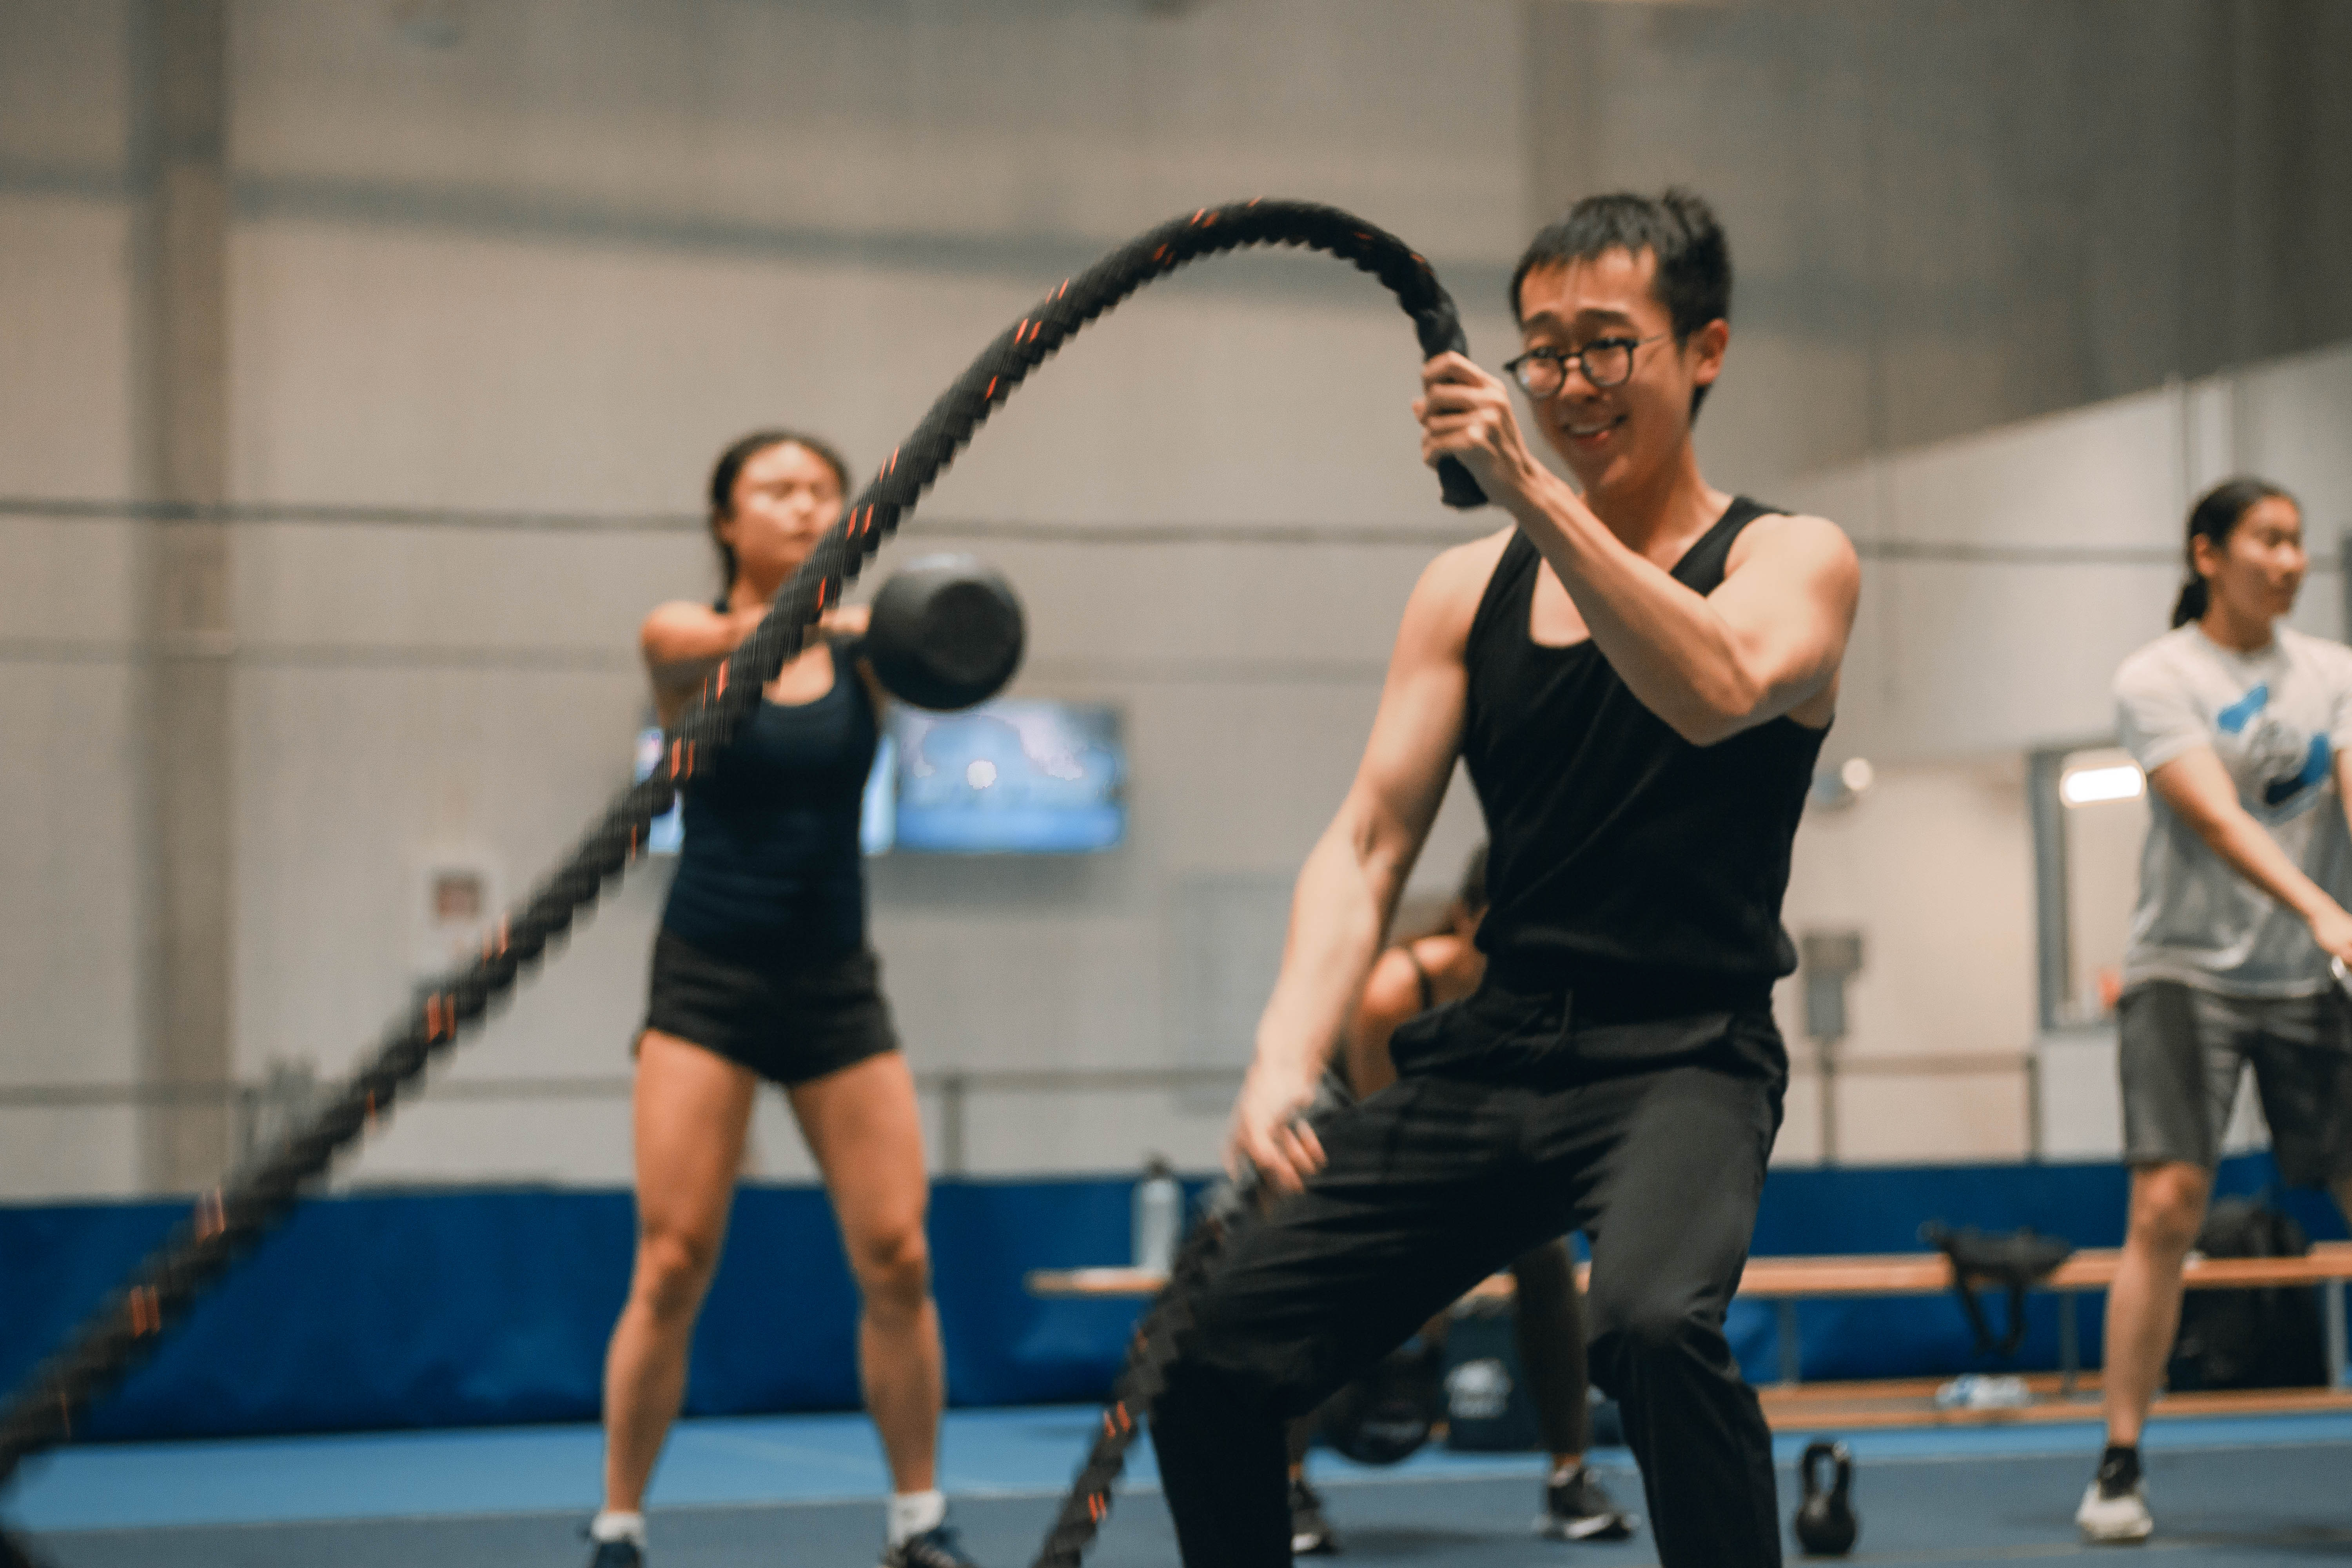 Asian male student in a black tank top using battle ropes with a look of determination on his face